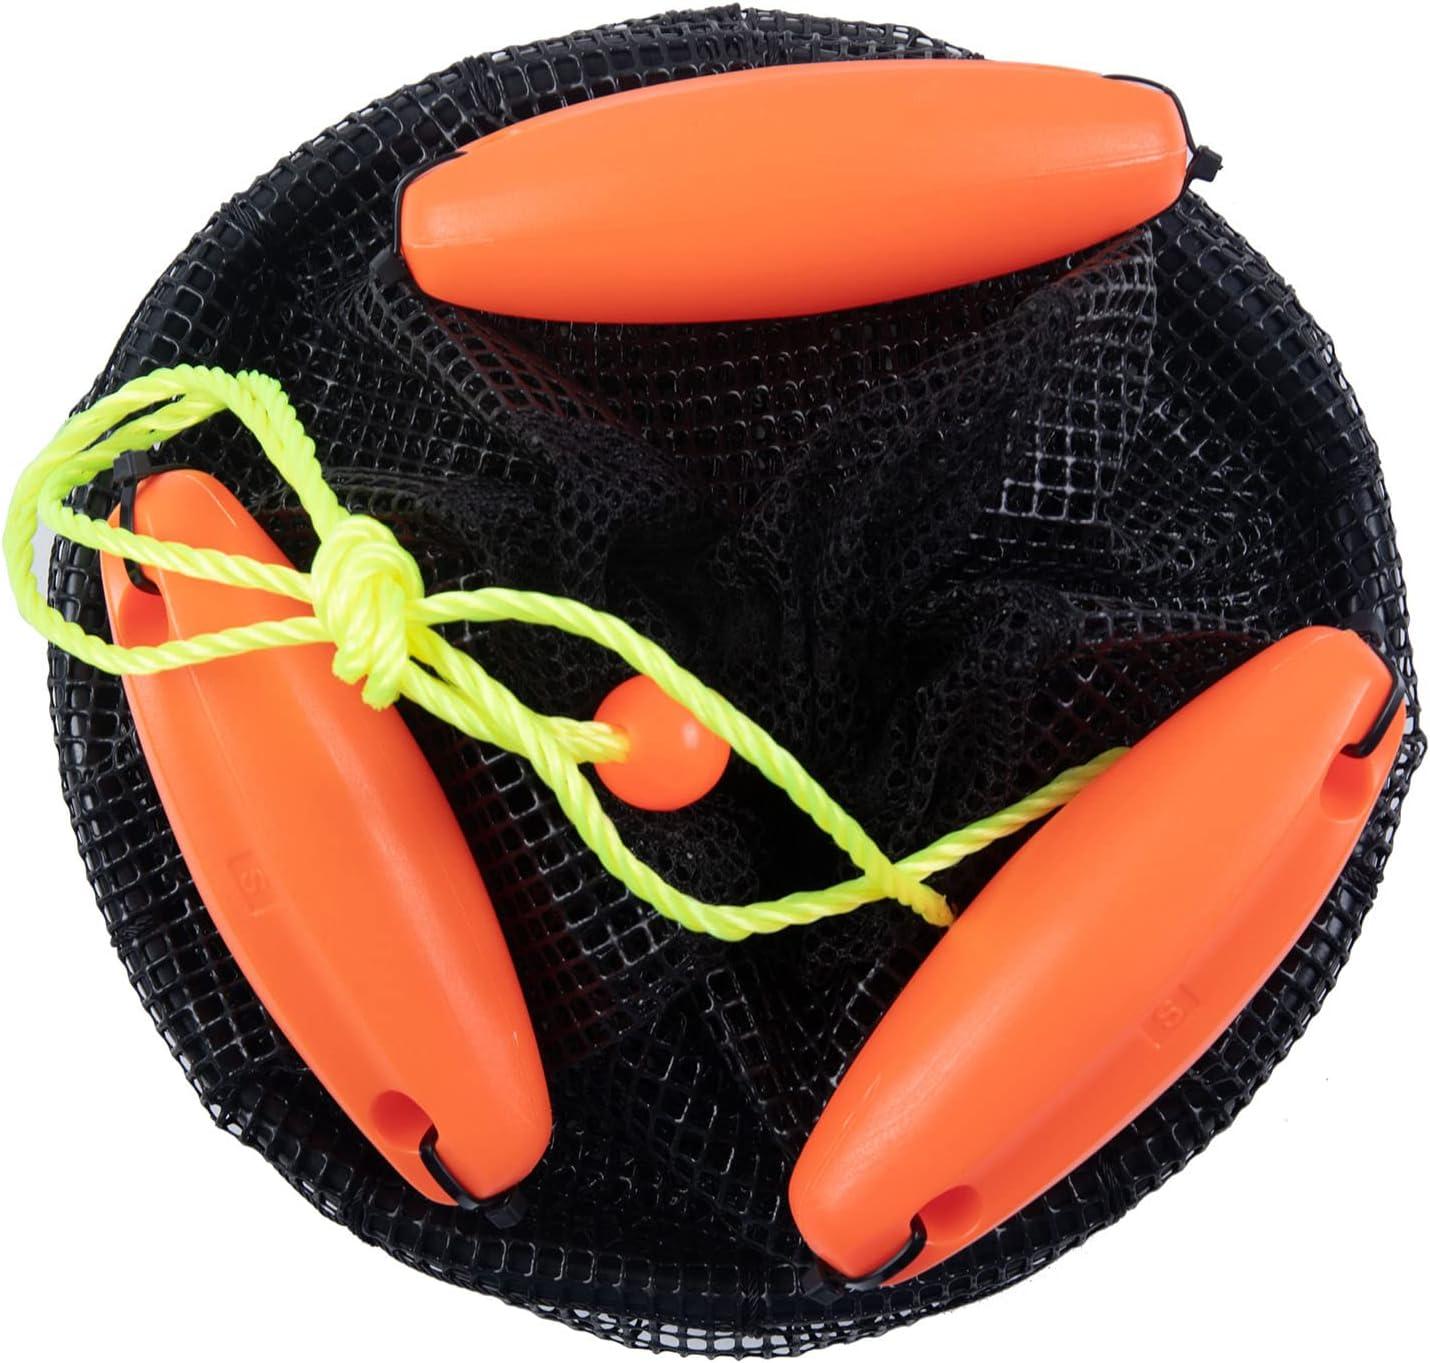 Z&W 5 Gallon Collapsible Floating Fishing Net Live Bait Bucket/Fishing  Basket/Chum Bag, Trap for Keeping Minnows, Shrimp, Leaches and Other Baits